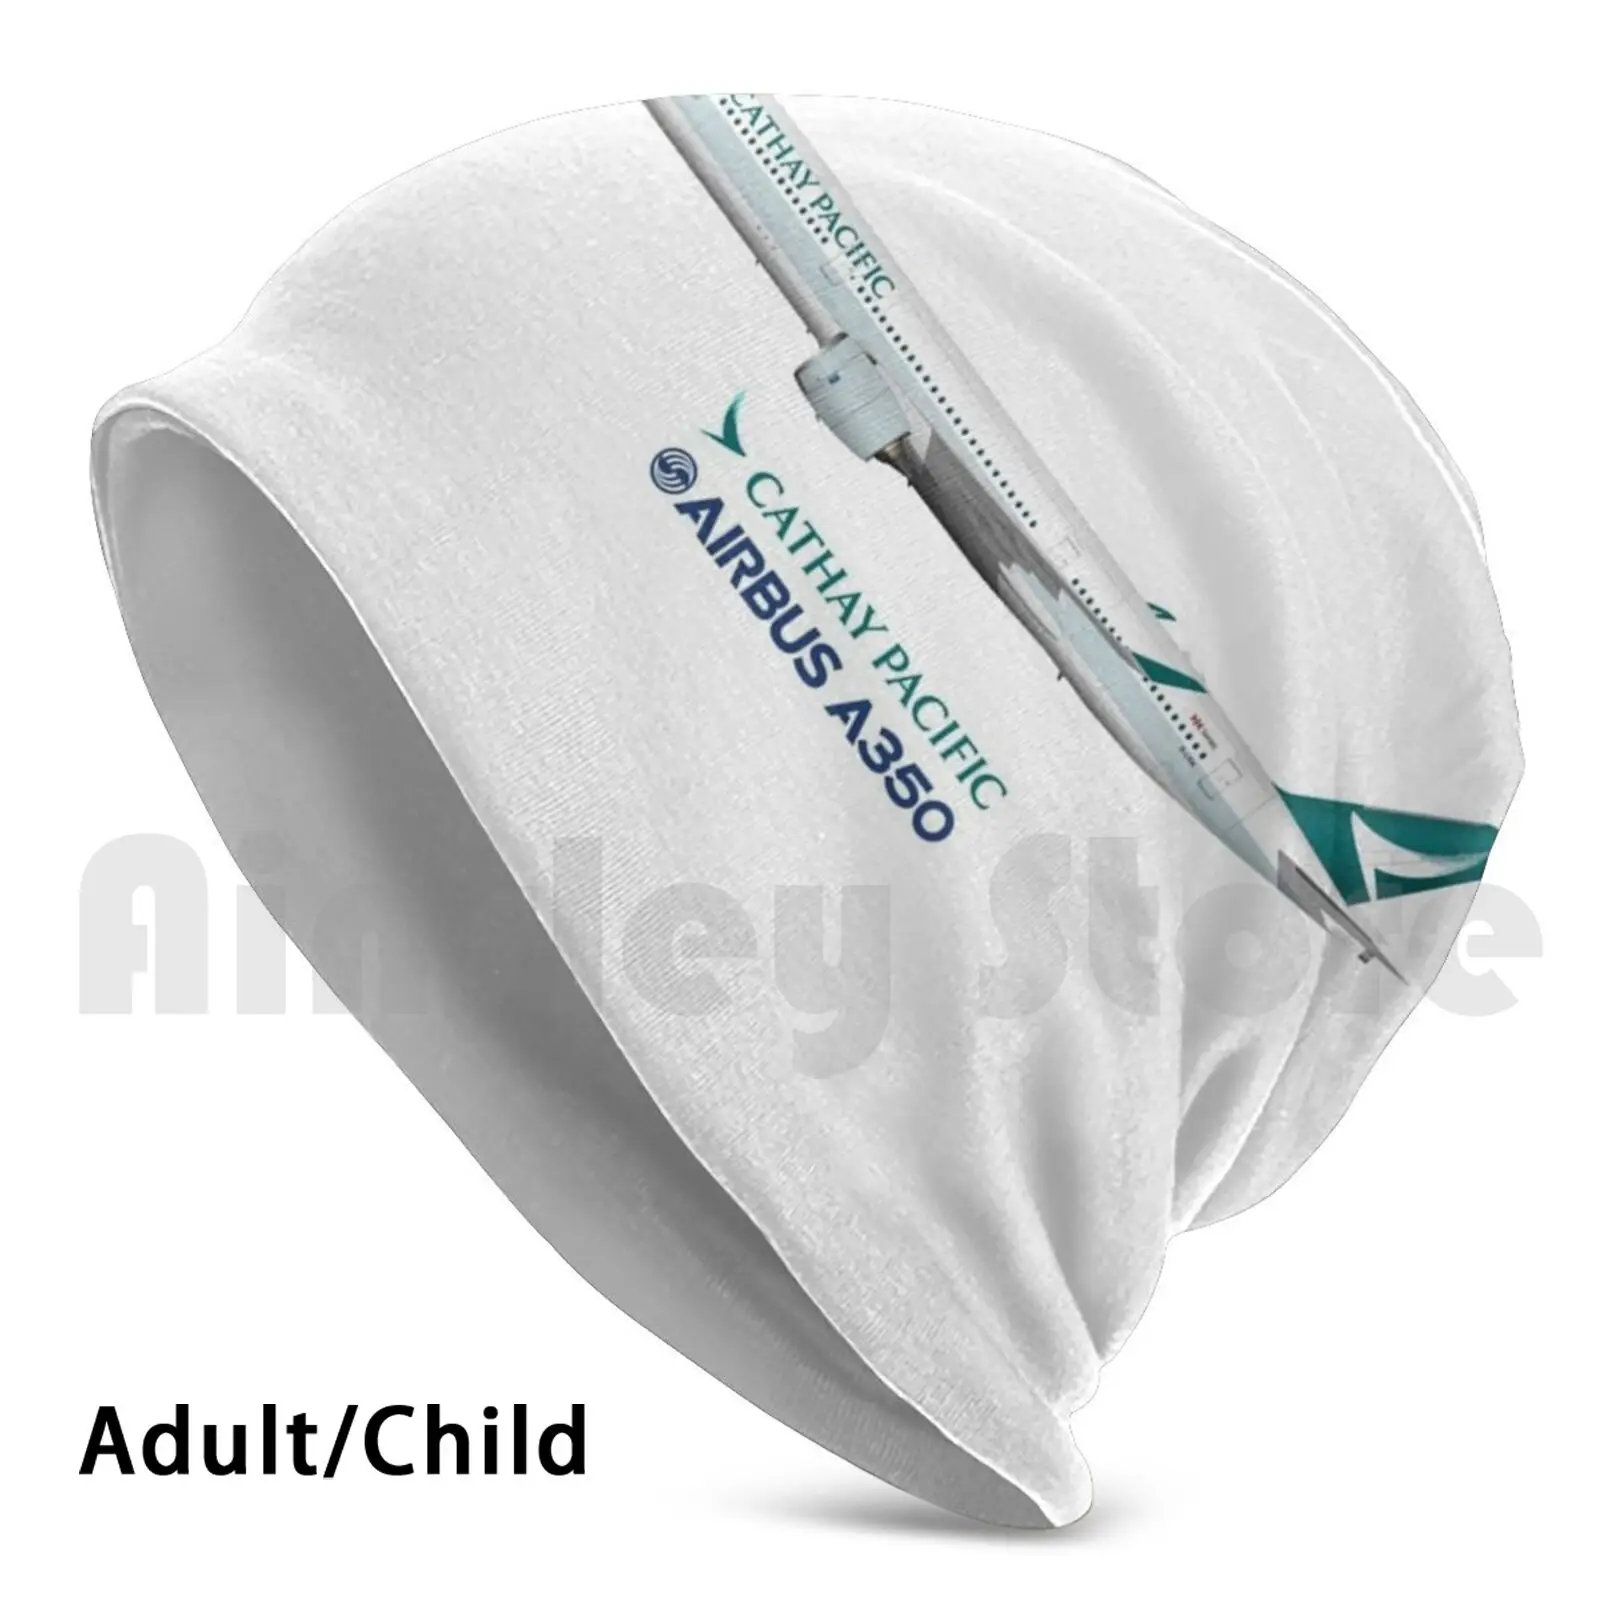 

Illustration Of Cathay Pacific Airbus A350 Beanies Knit Hat Hip Hop Airbus A350 A350 Xwb Airbus A350 A350 Airbus